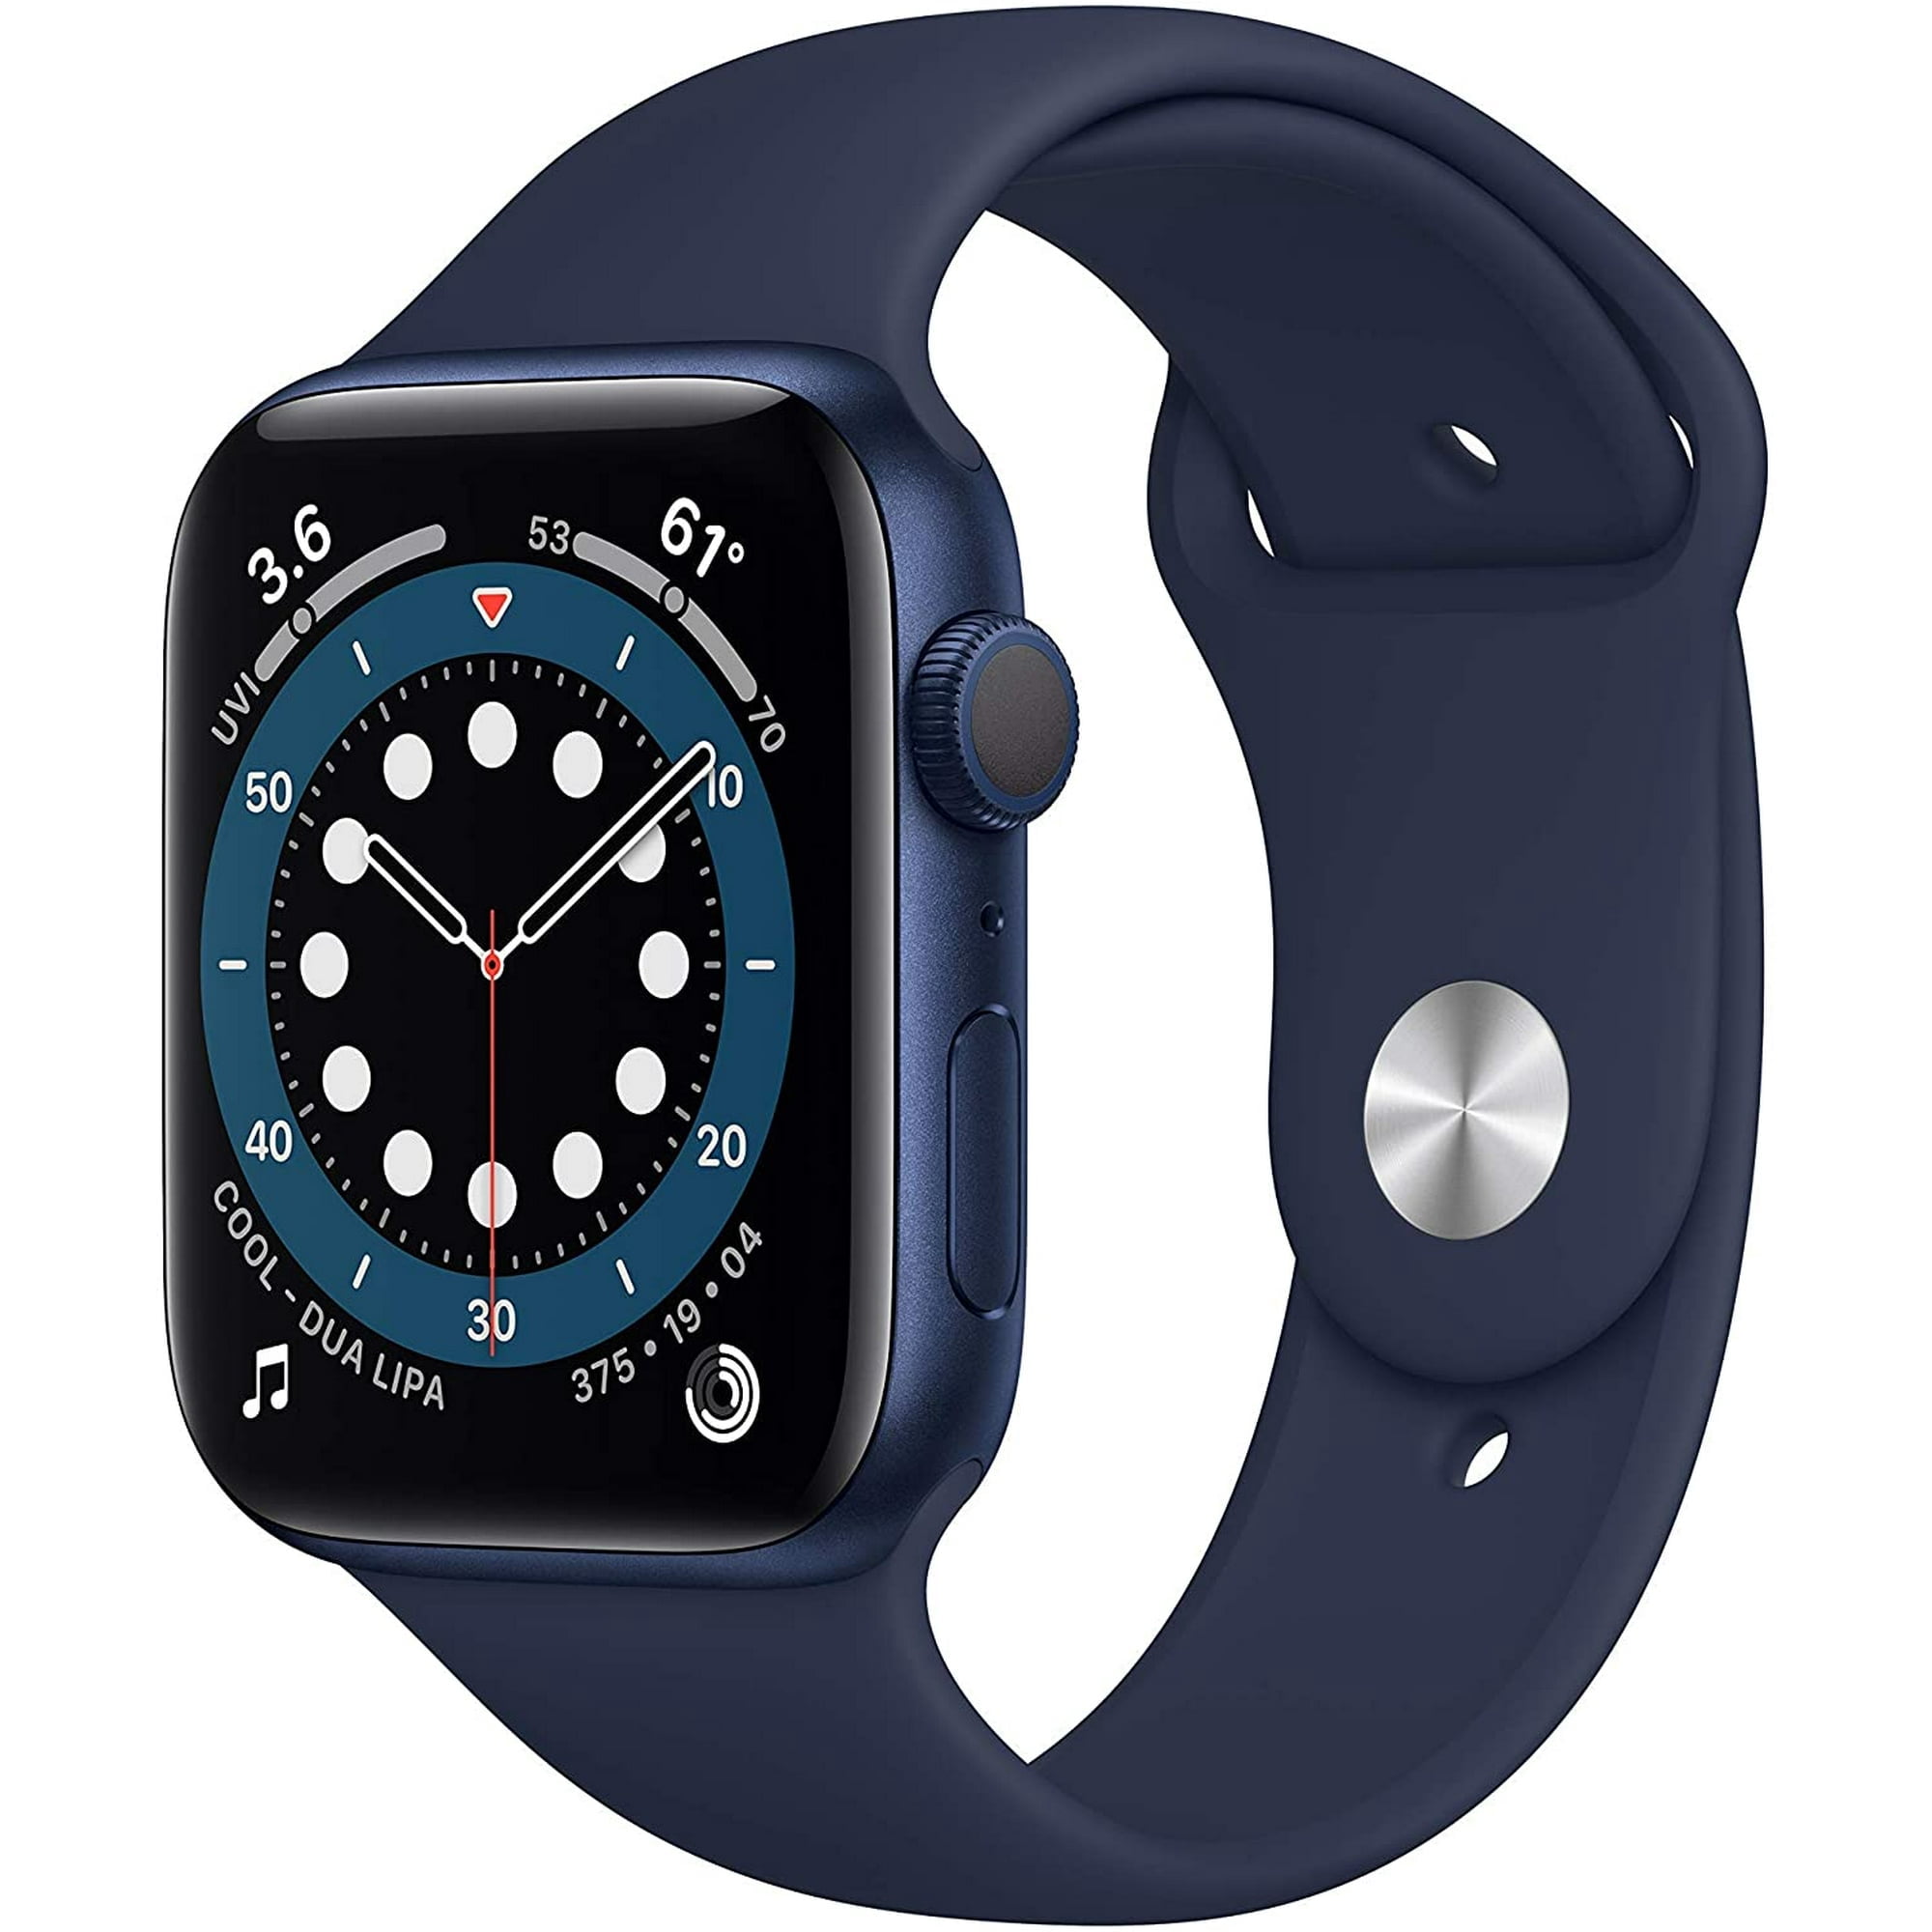 Apple Watch Series 6 (GPS, 40mm) - Space Gray Aluminum Case with